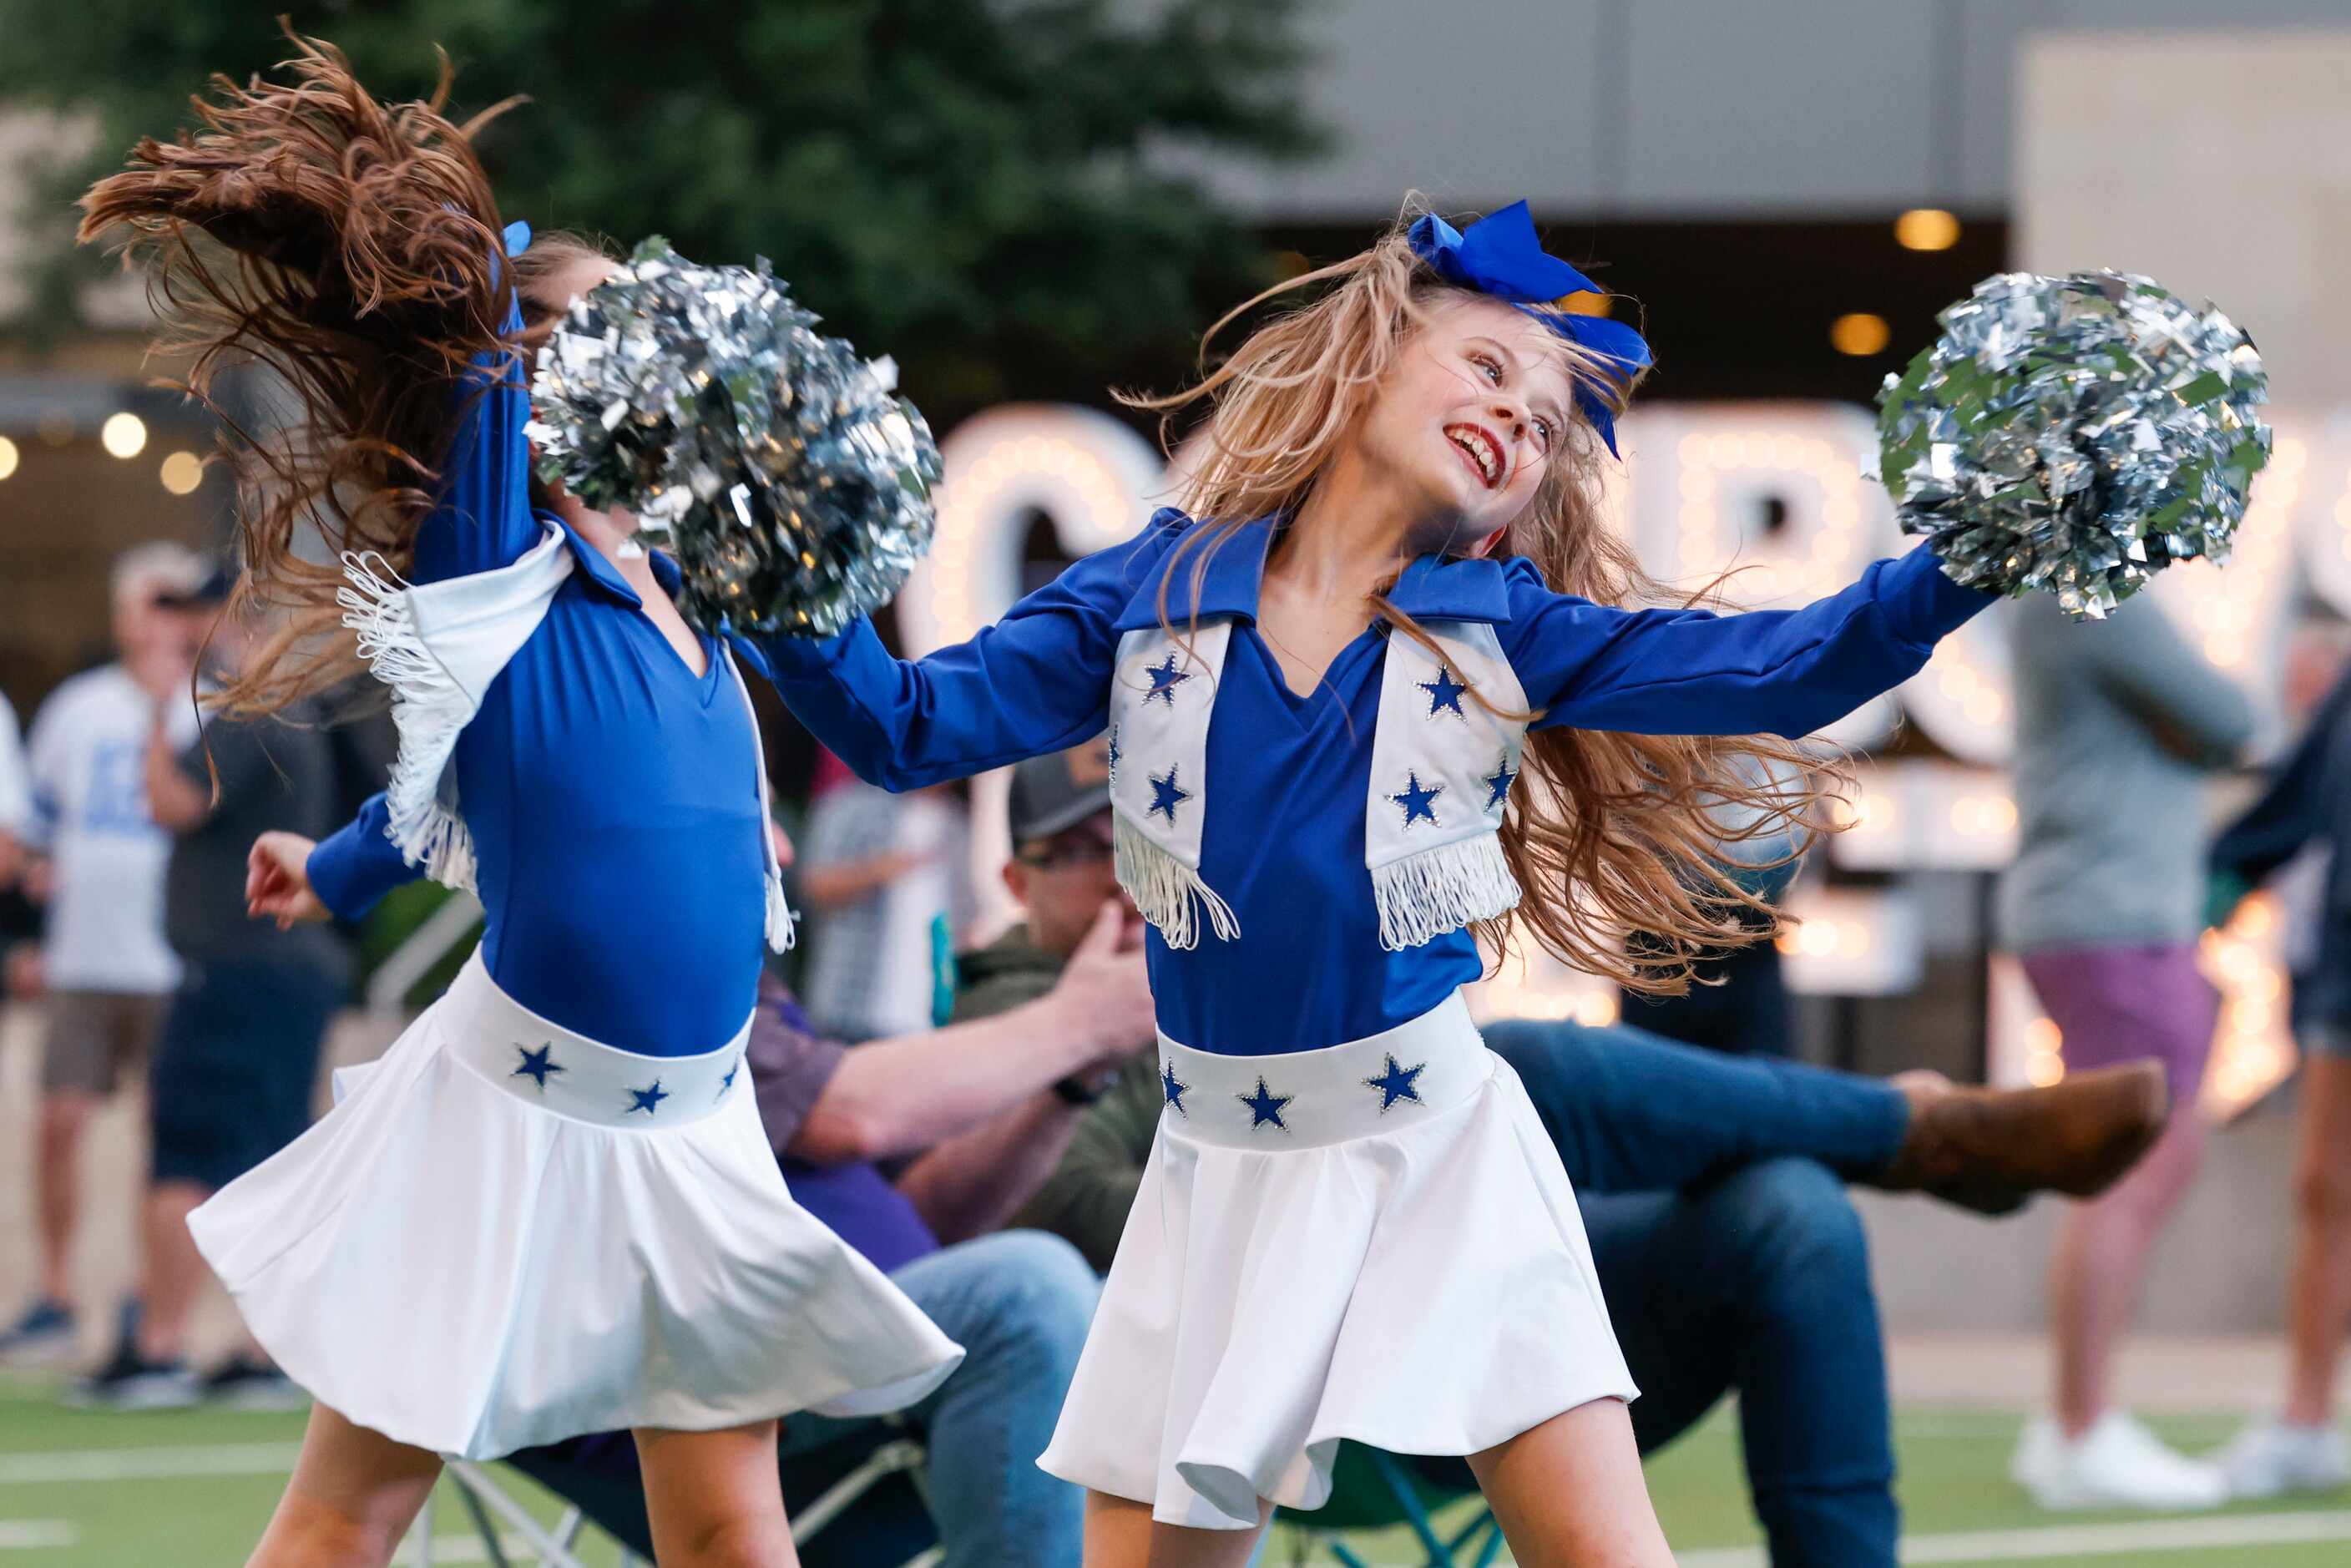 Amelia Purdue, 9, (left) with her friend Hannah Paulek, 9,  dance to a song during an NFL...